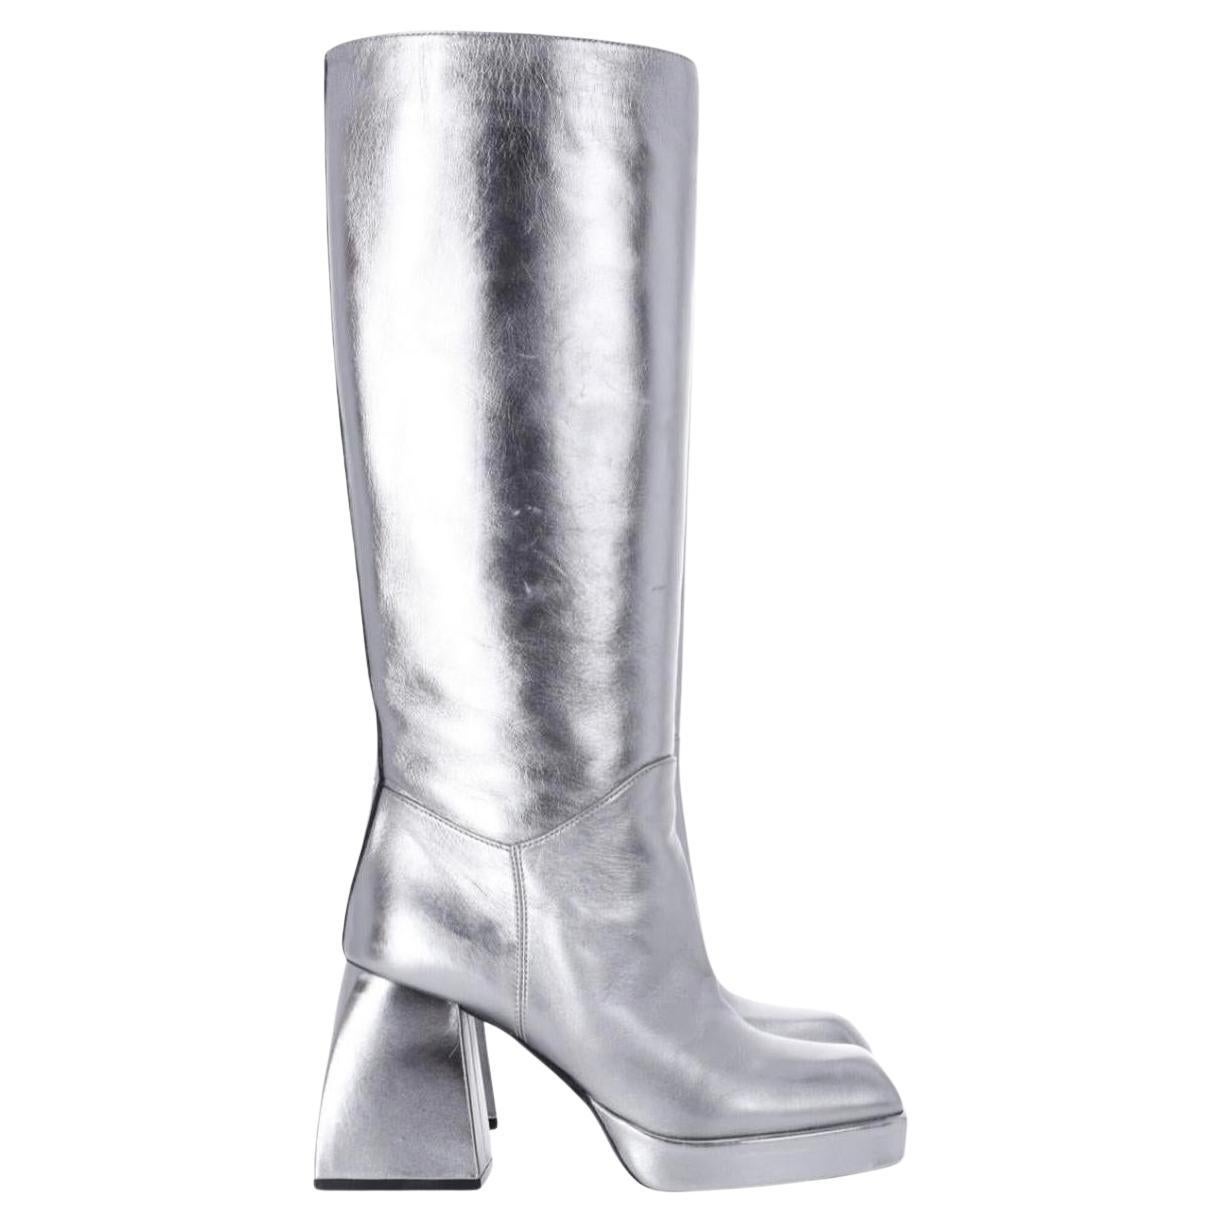 Nodaleto Silver Bulla Boots Knee High Size 39 For Sale